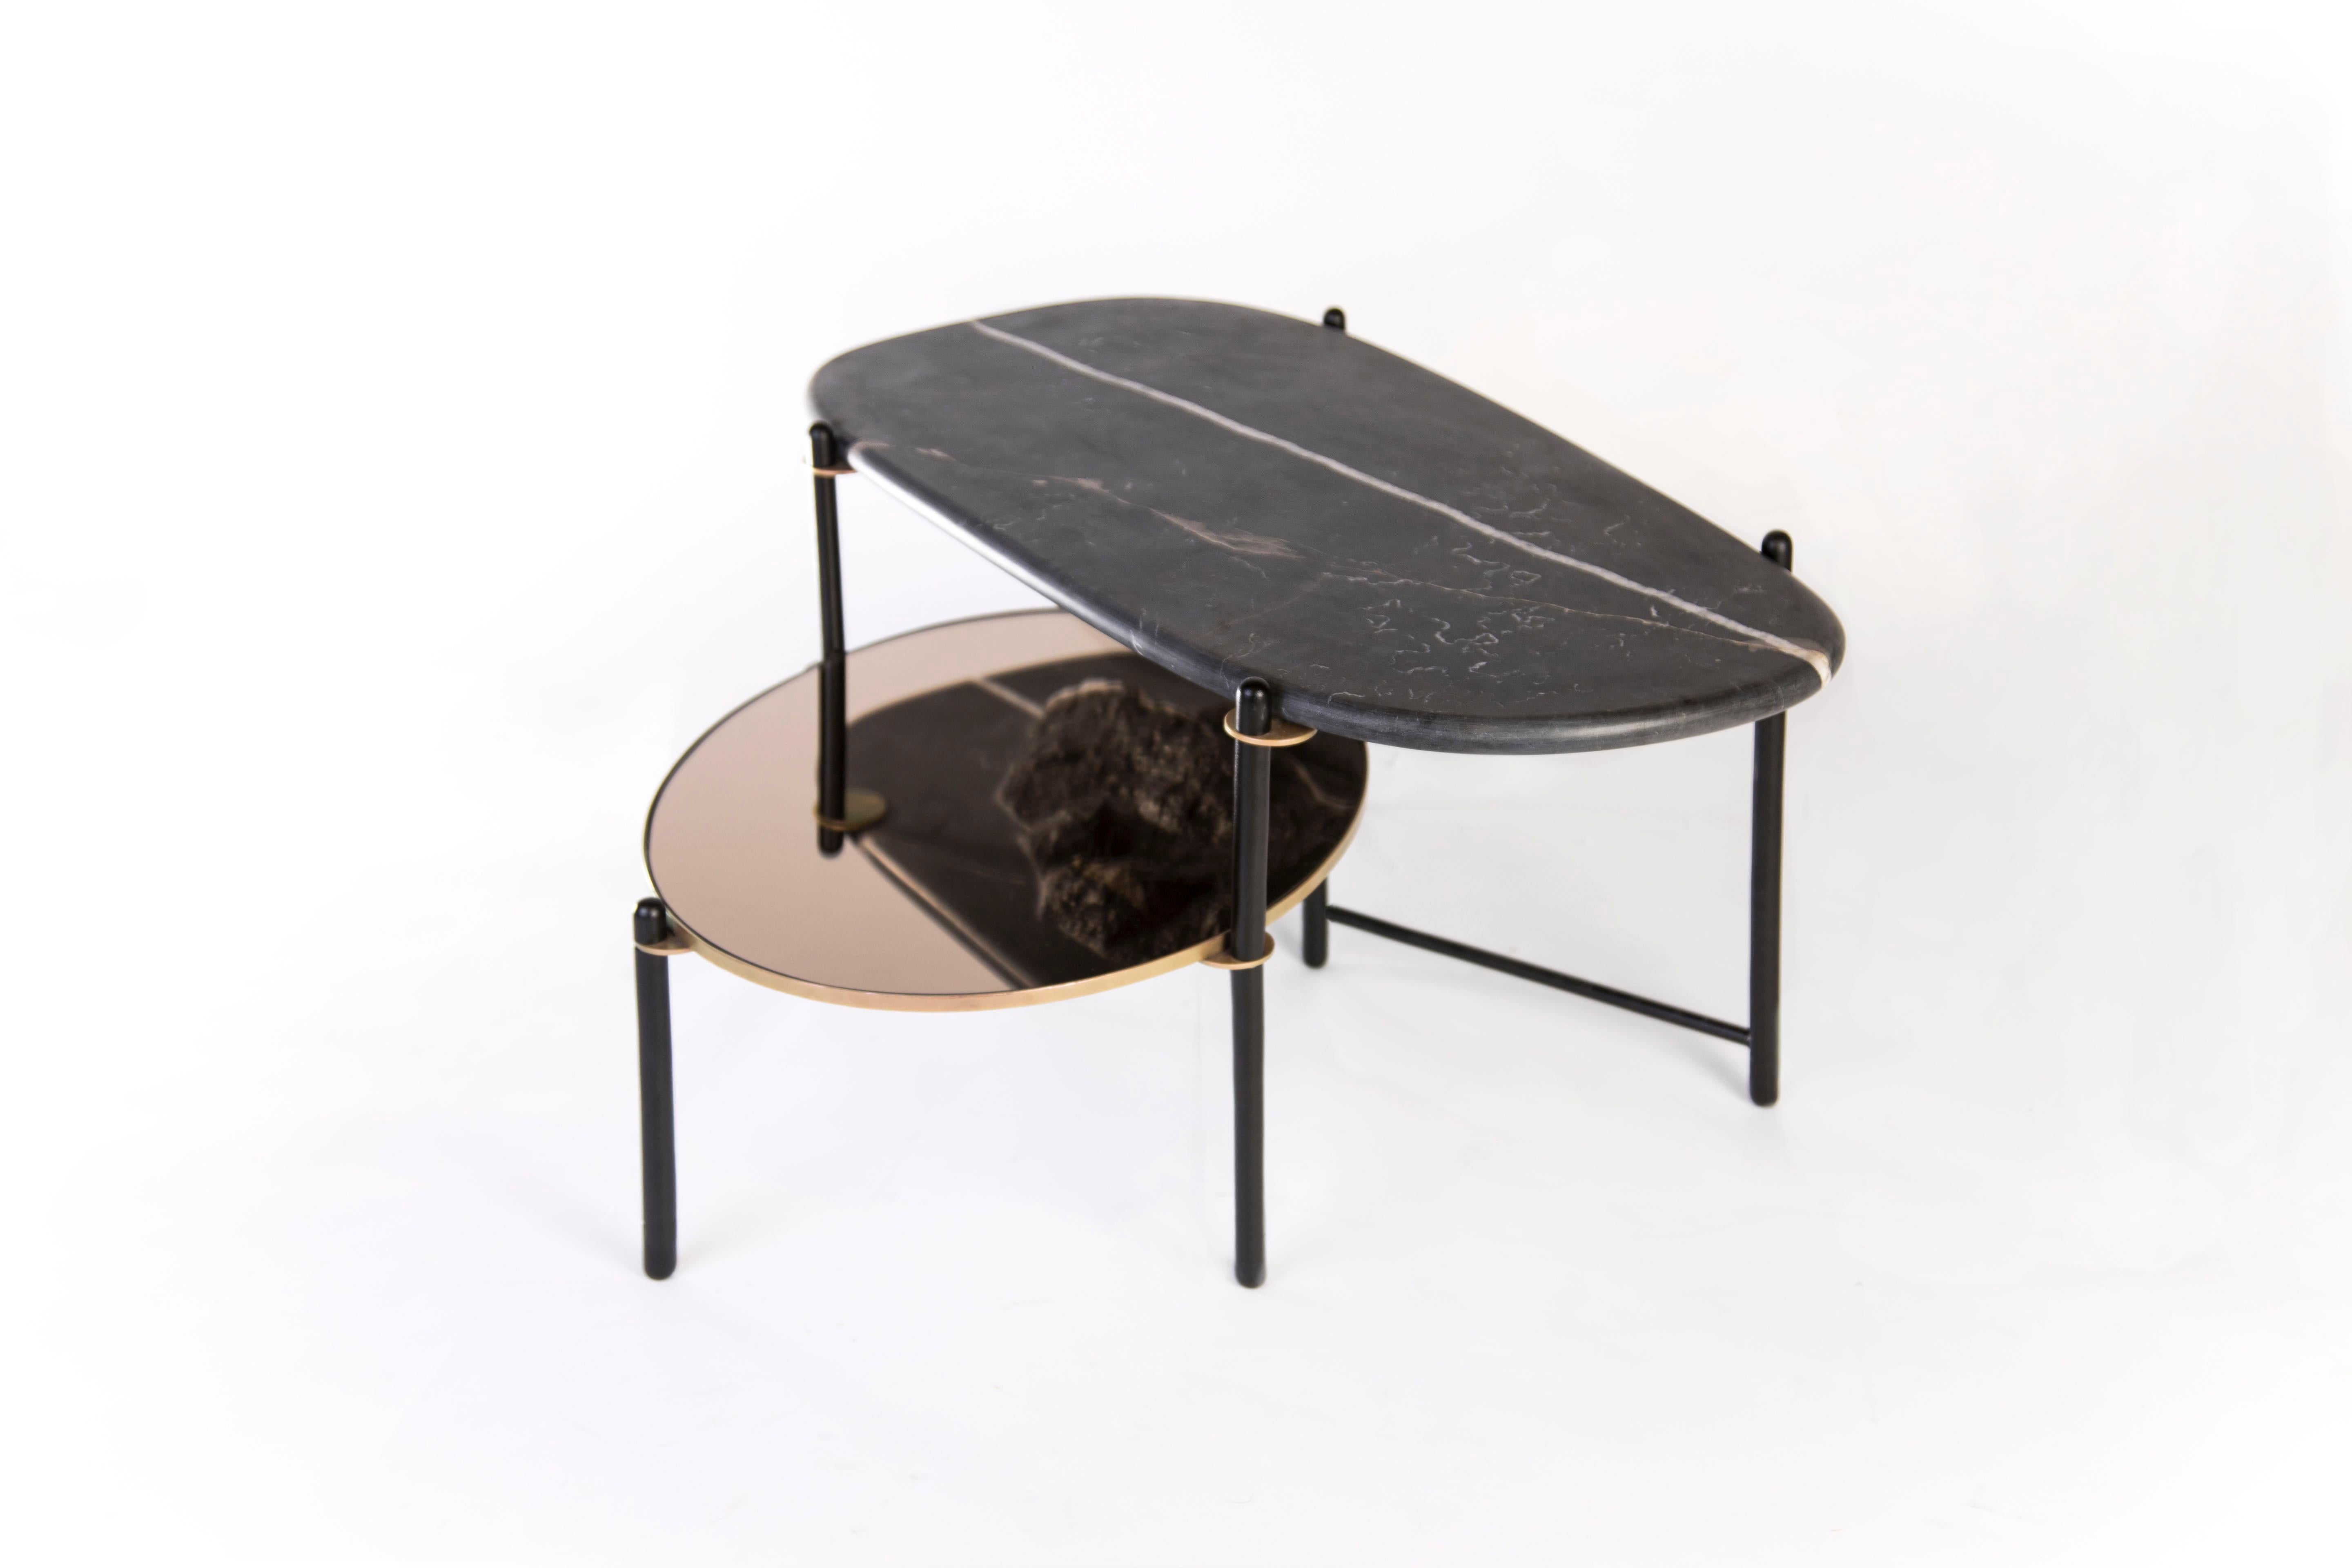 Montaña Small Coffee Table by Comité De Proyectos
Dimensions: D 80 x W 68.3 x H 40 cm.
Materials: Monterrey marble, Cold rolled bars in black powder coated paint with details in Cooper powder coated paint.
Also available in large Size (D 120 x W